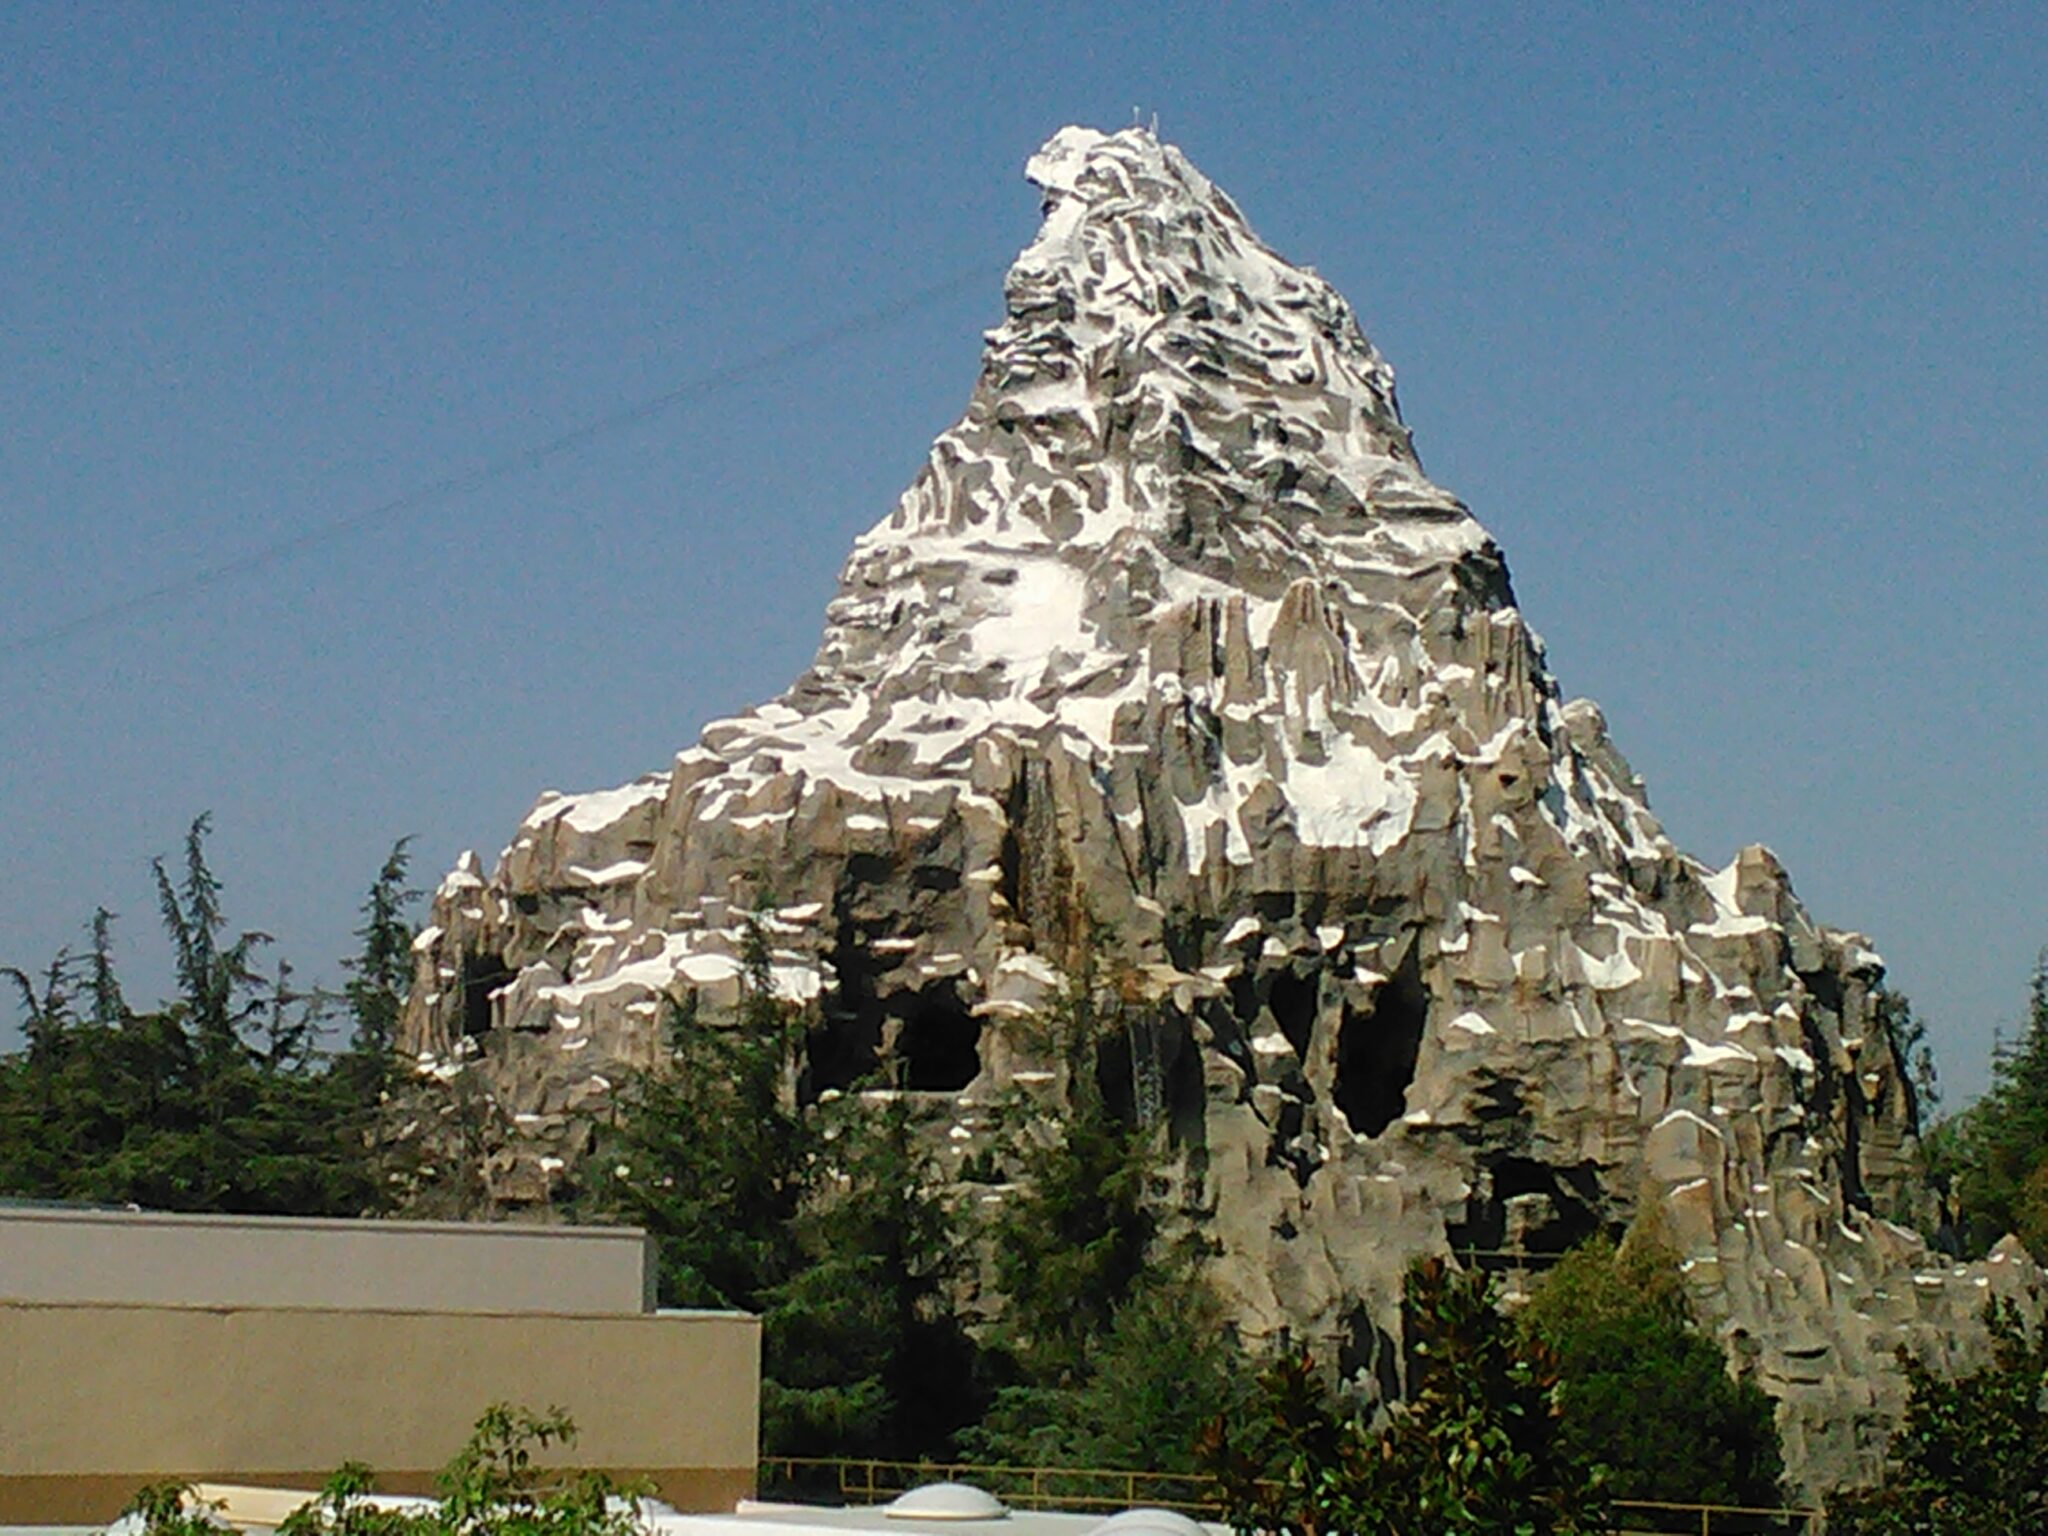 The Matterhorn Bobsleds At Disneyland Ride Review Tips From The Magical Divas And Devos